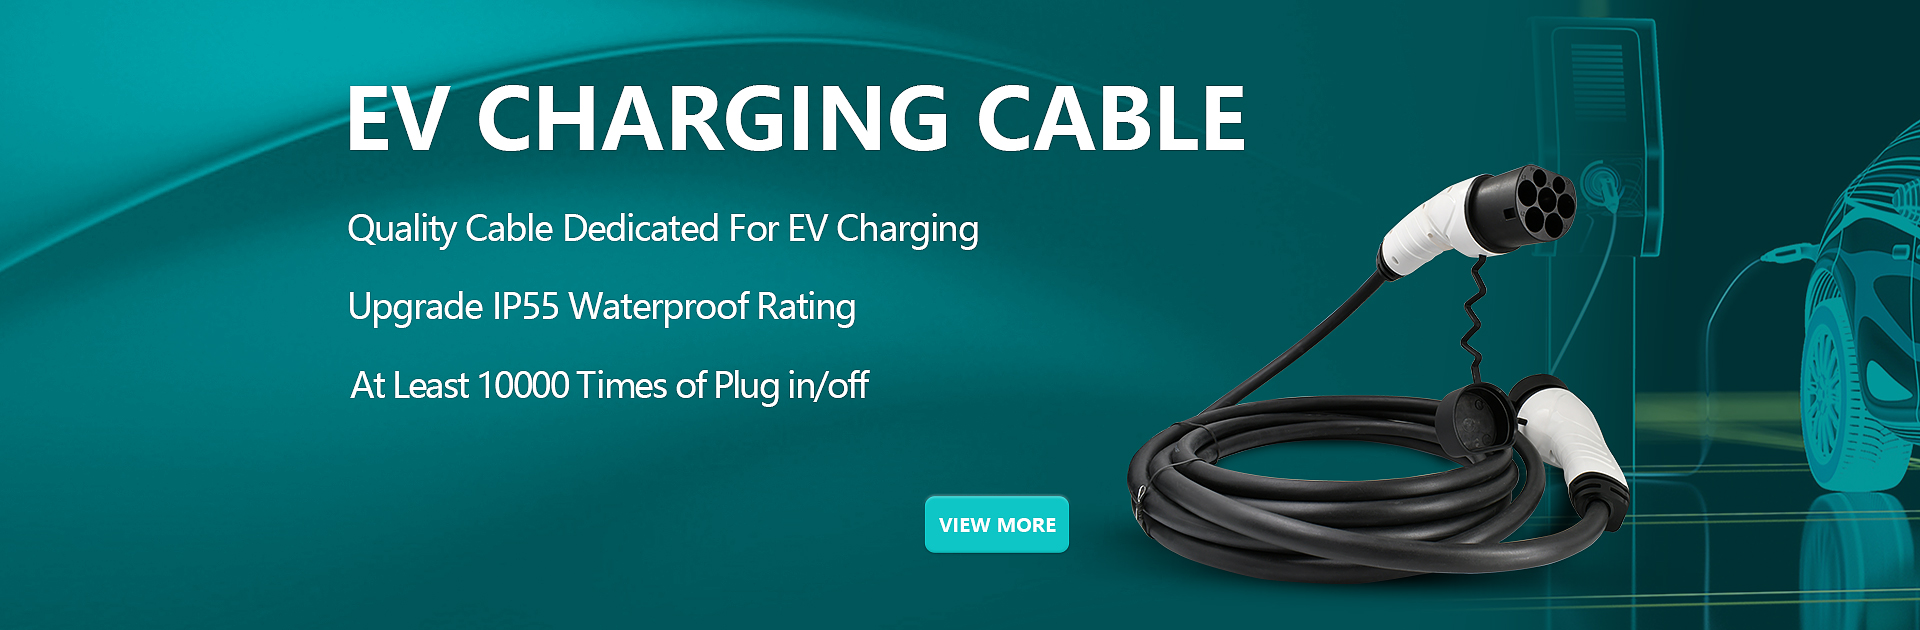 slocable ev charging cable banner